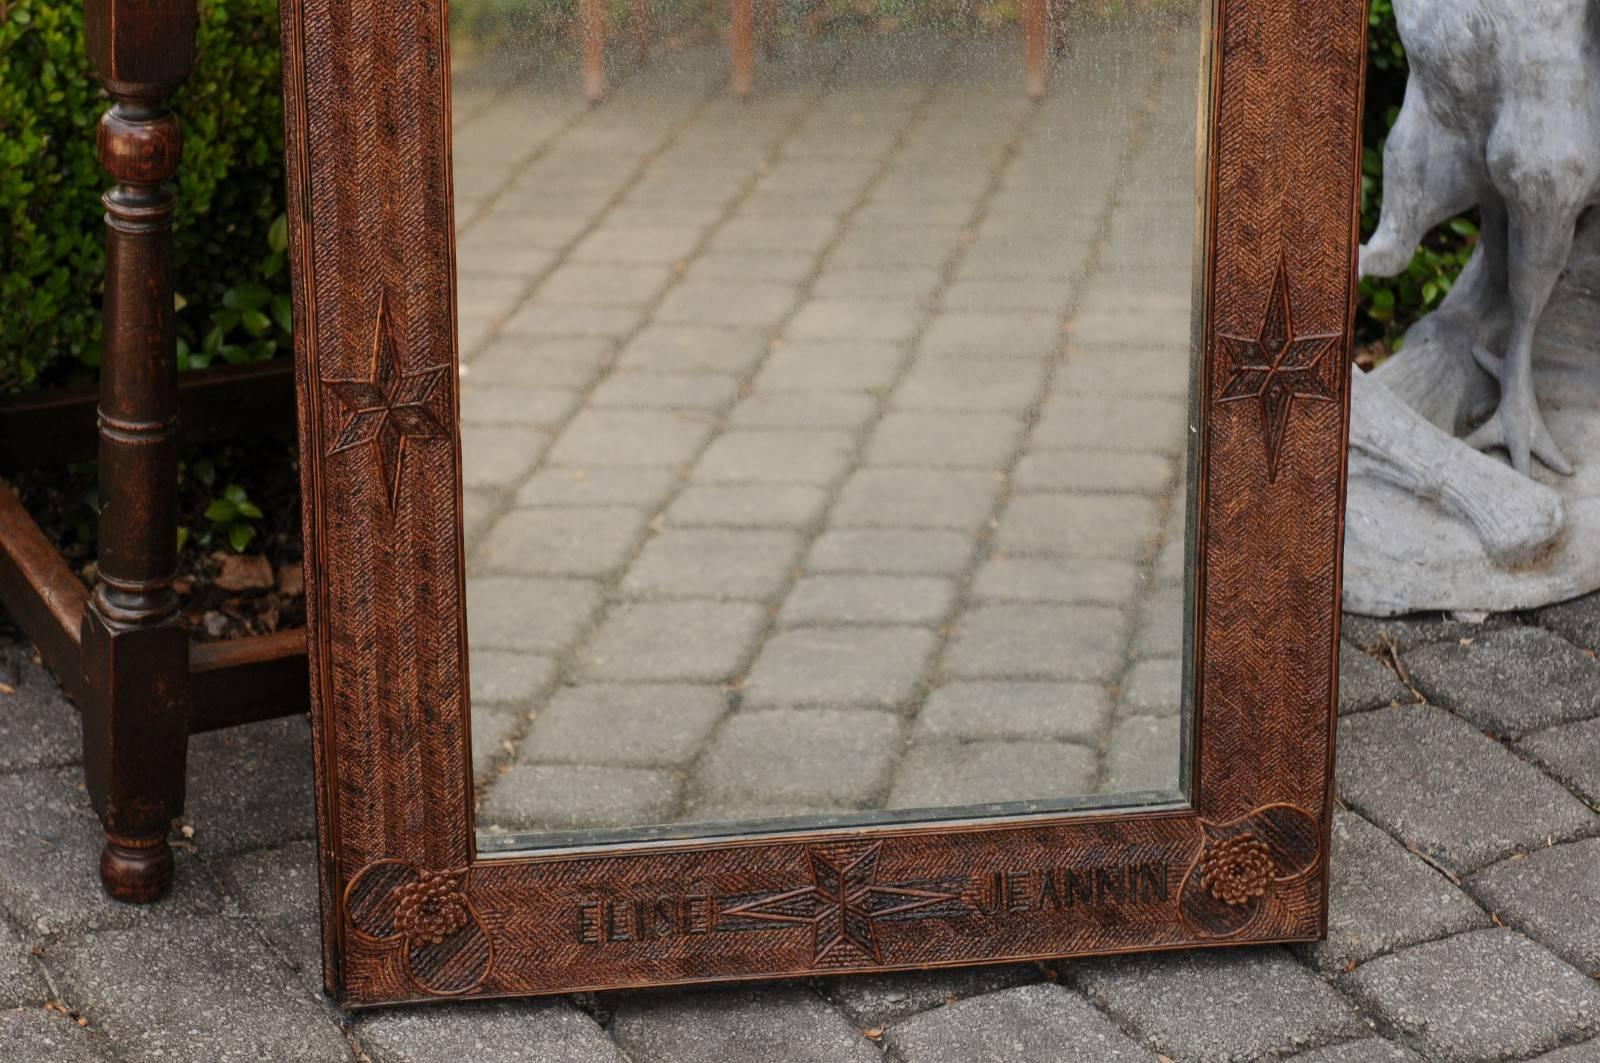 20th Century French Wooden Folk Art Mirror from the 1920s with Star and Heart Motifs